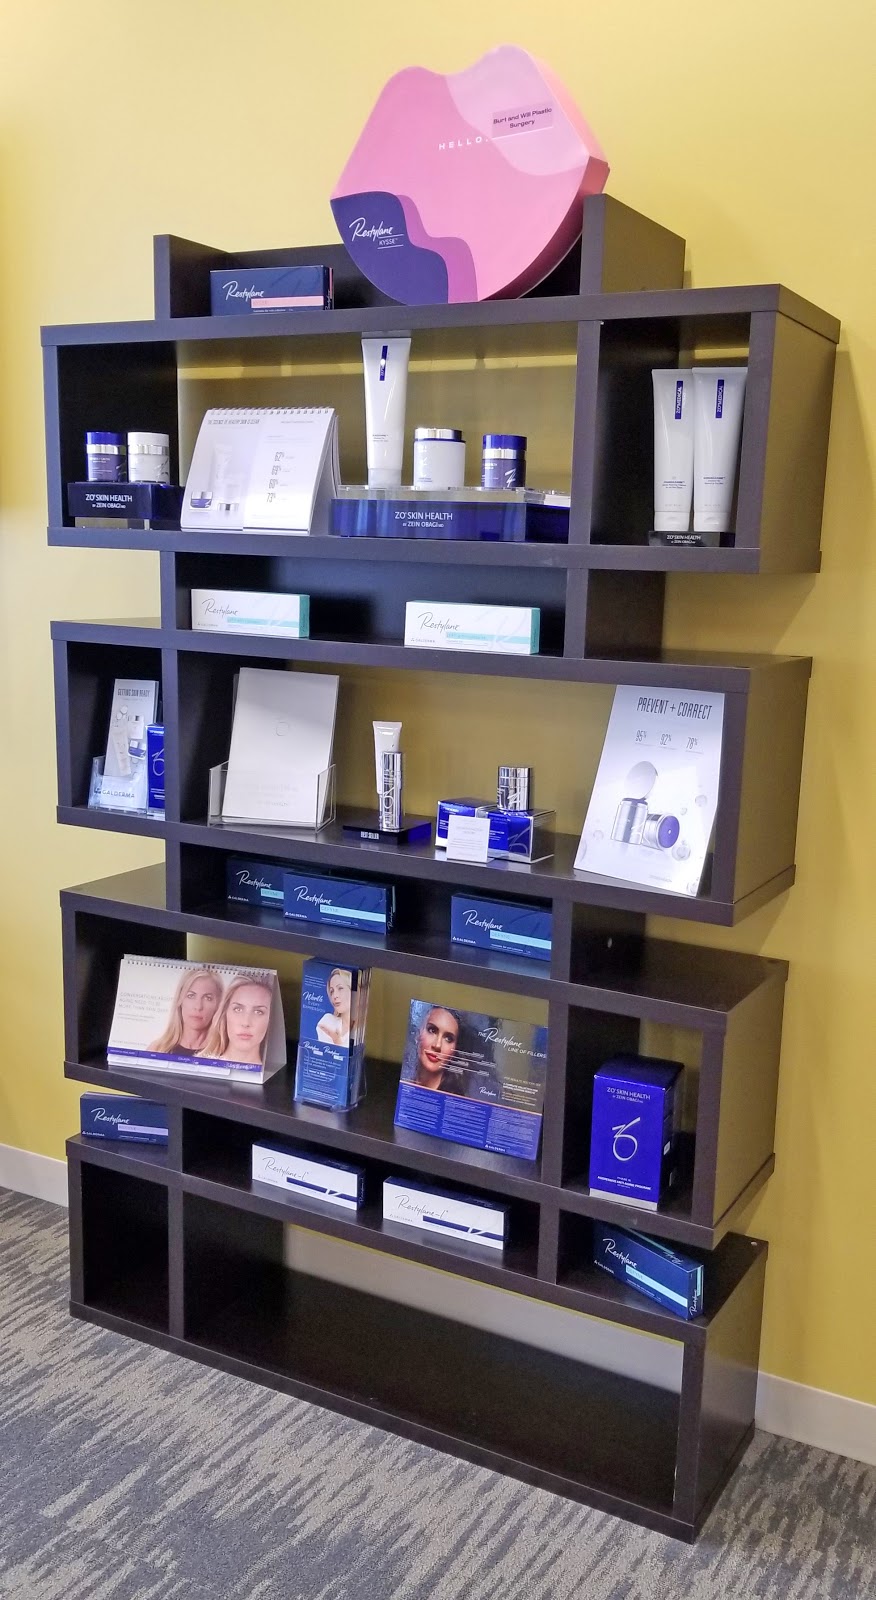 Burt and Will Plastic Surgery and Dermatology | 6860 N Frontage Rd suite c, Burr Ridge, IL 60527, USA | Phone: (630) 455-9292